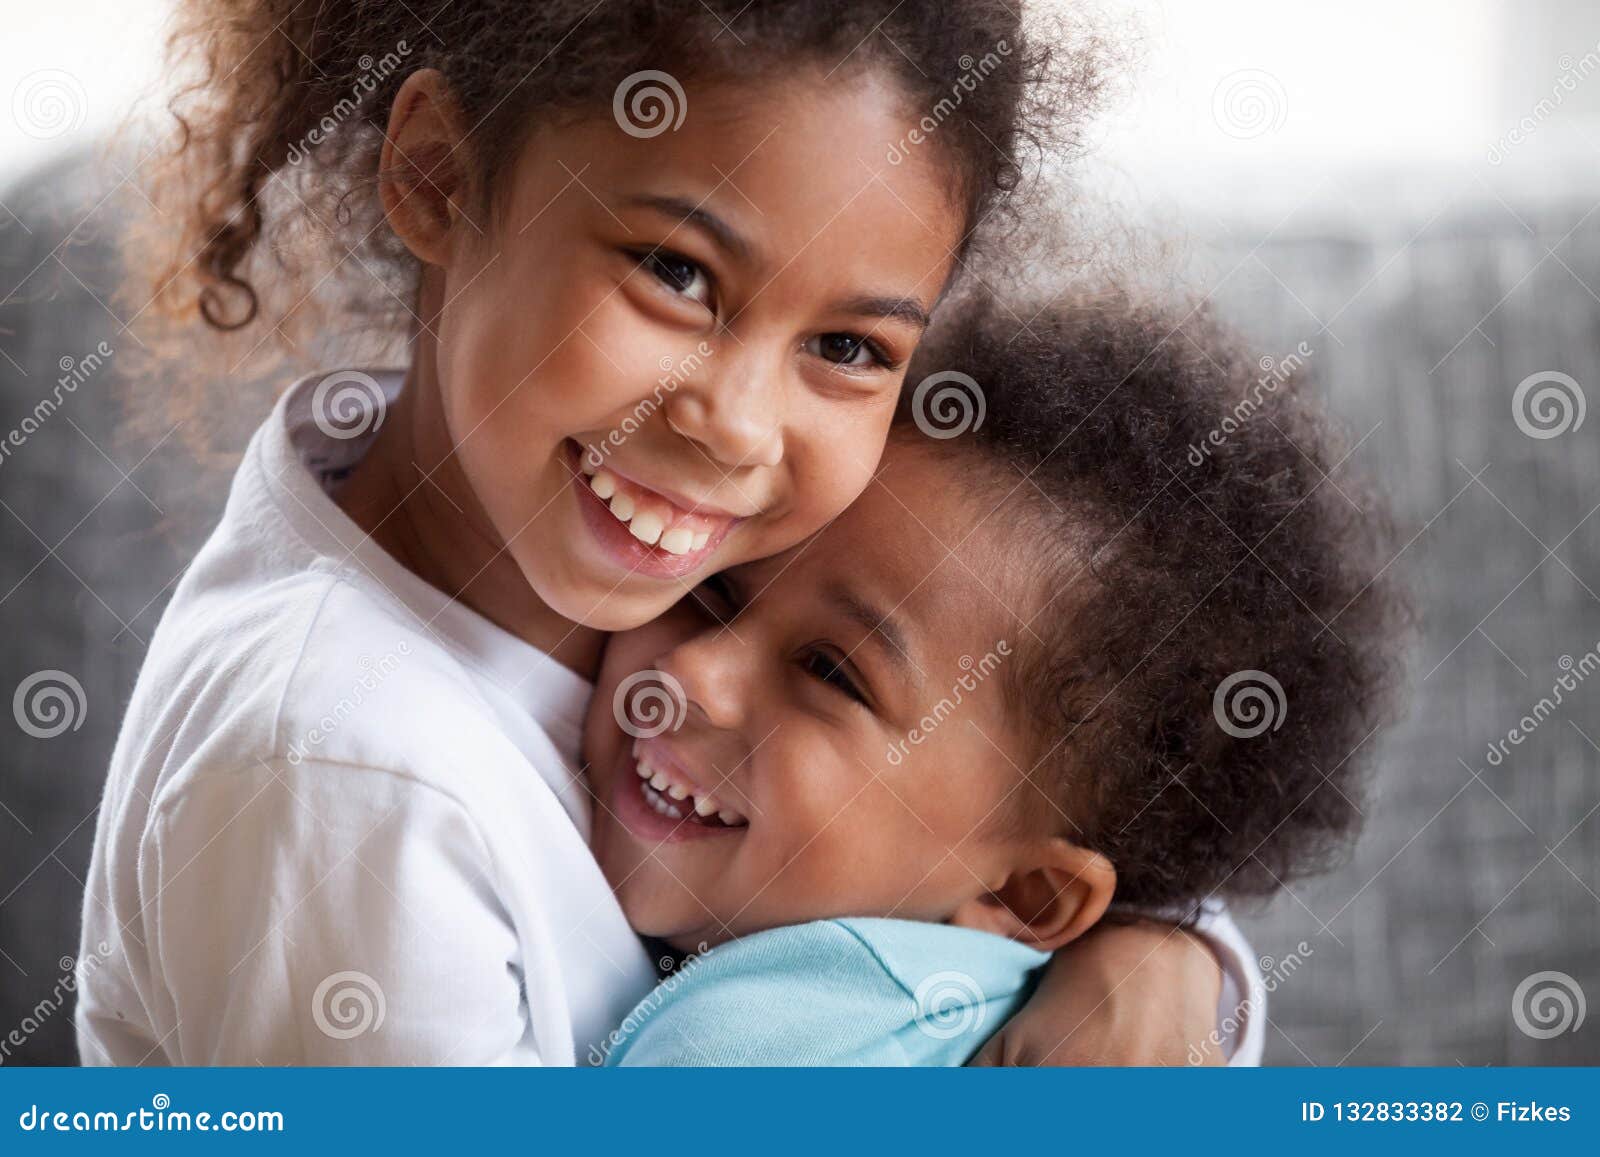 happy african american siblings embracing, sitting together